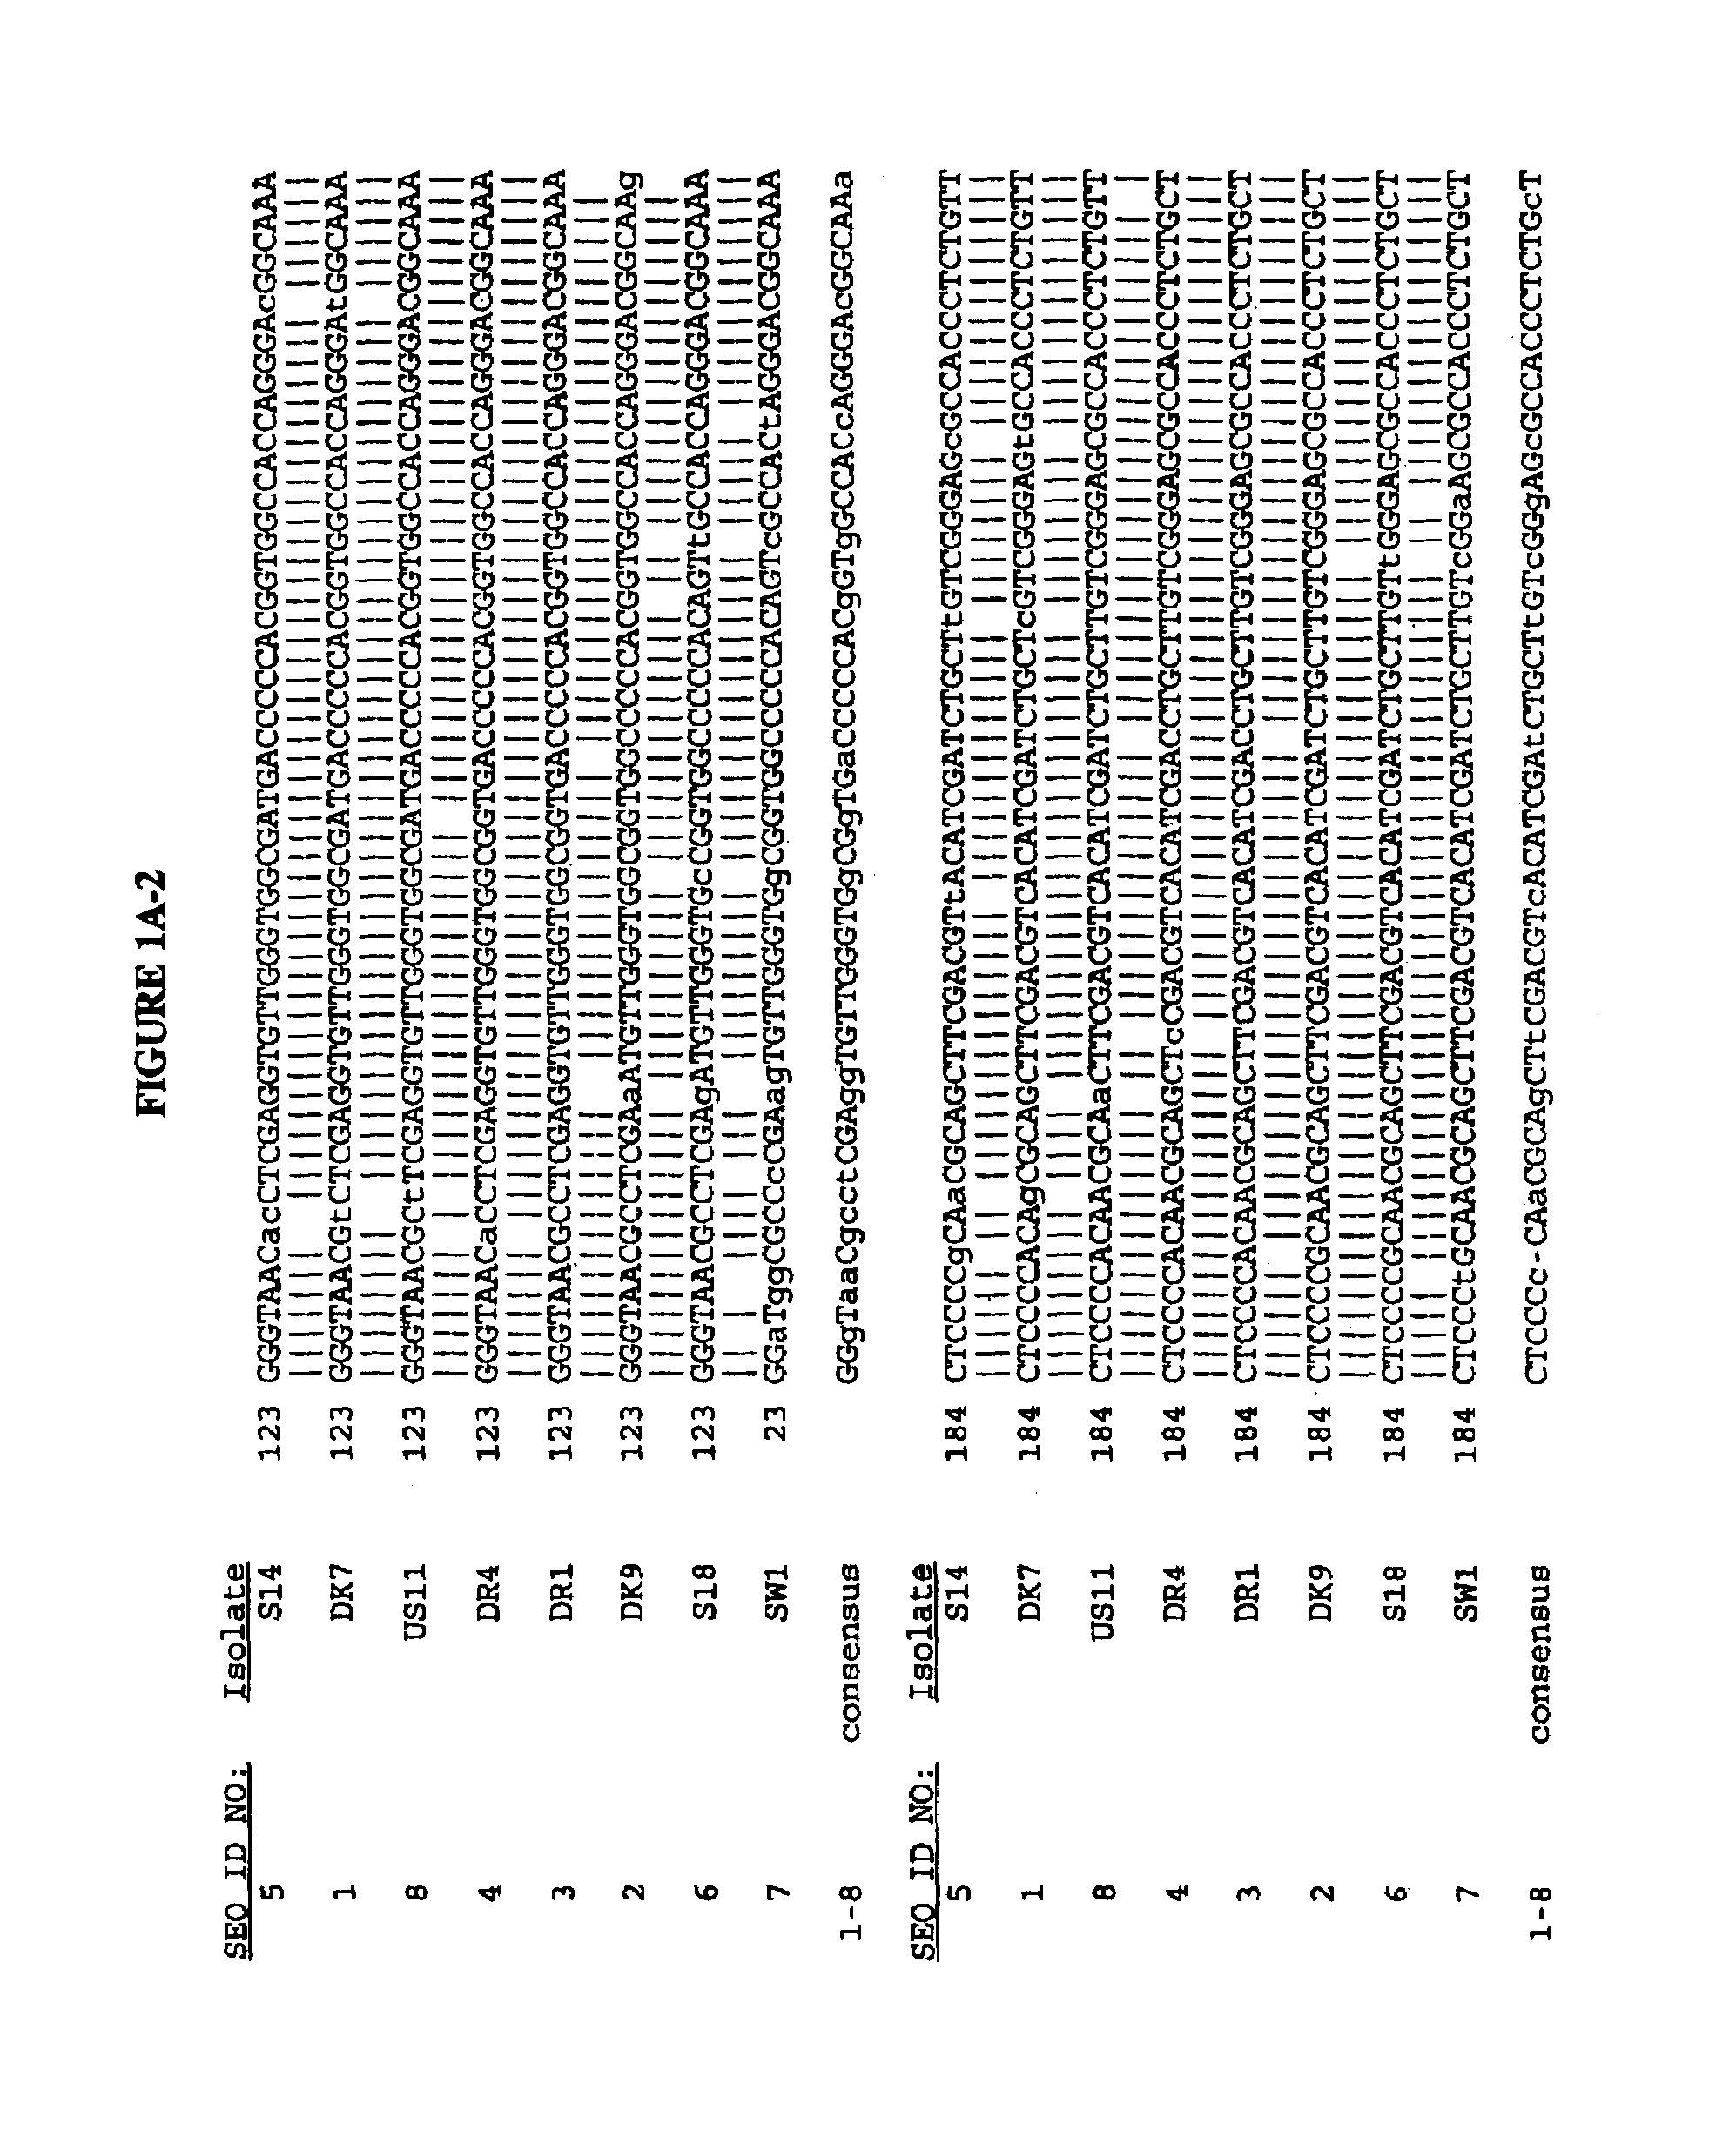 Nucleotide and deduced amino acid sequences of the envelope 1 and core genes of isolates of hepatitis C virus and the use of reagents derived from these sequences in diagnostic methods and vaccines